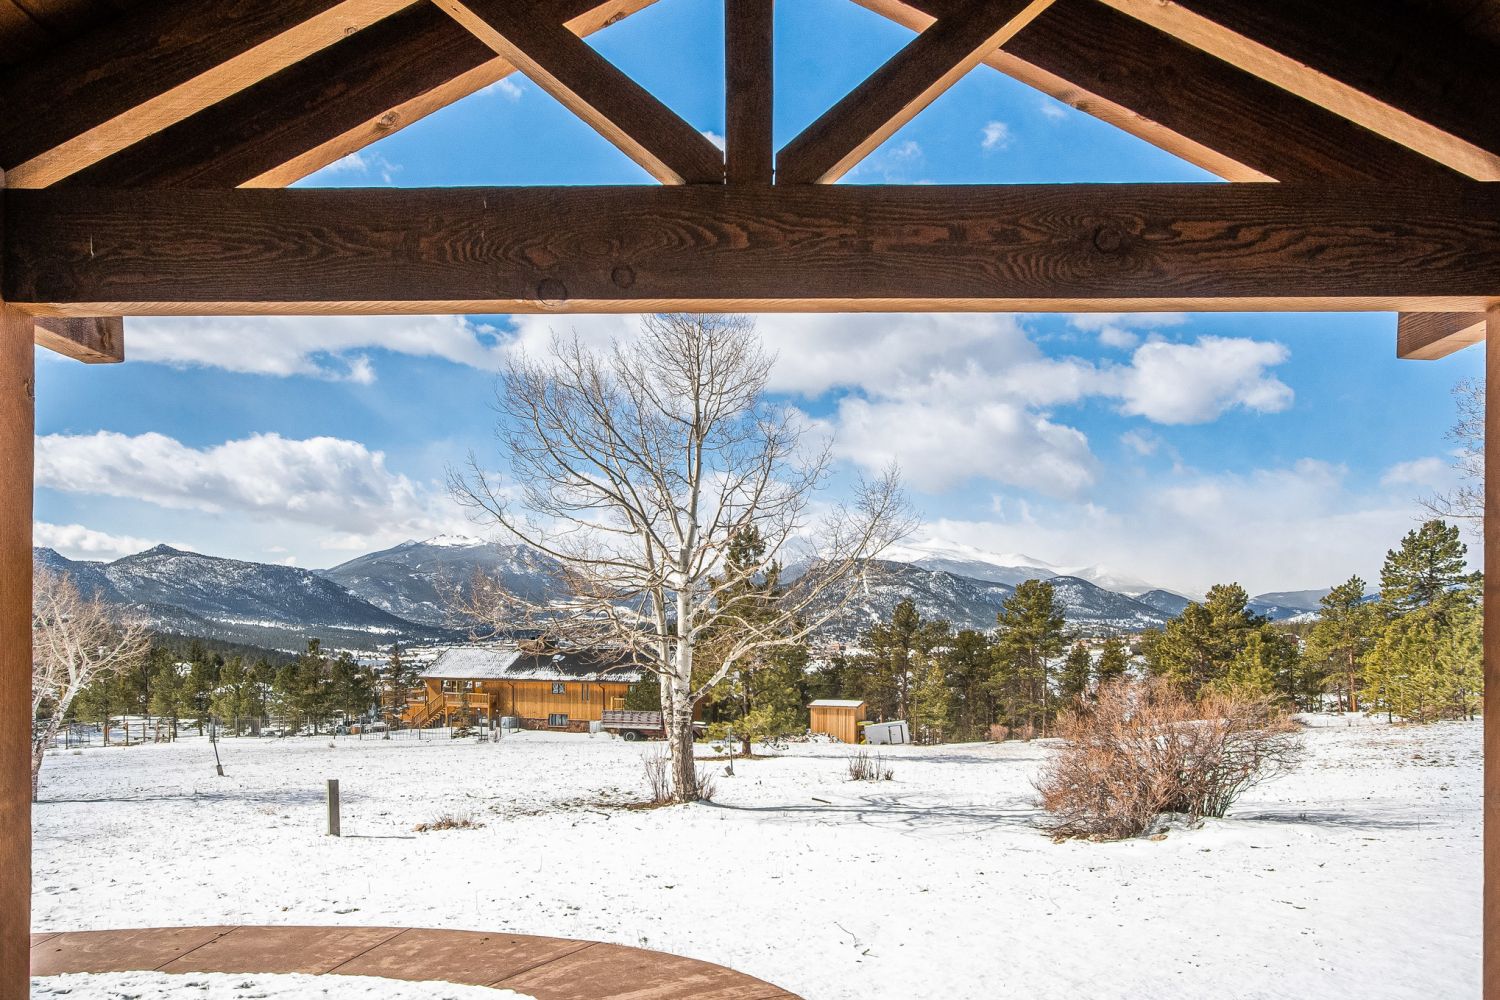 Snowline Vista Lodge - View from the front of the home with expansive mountain views